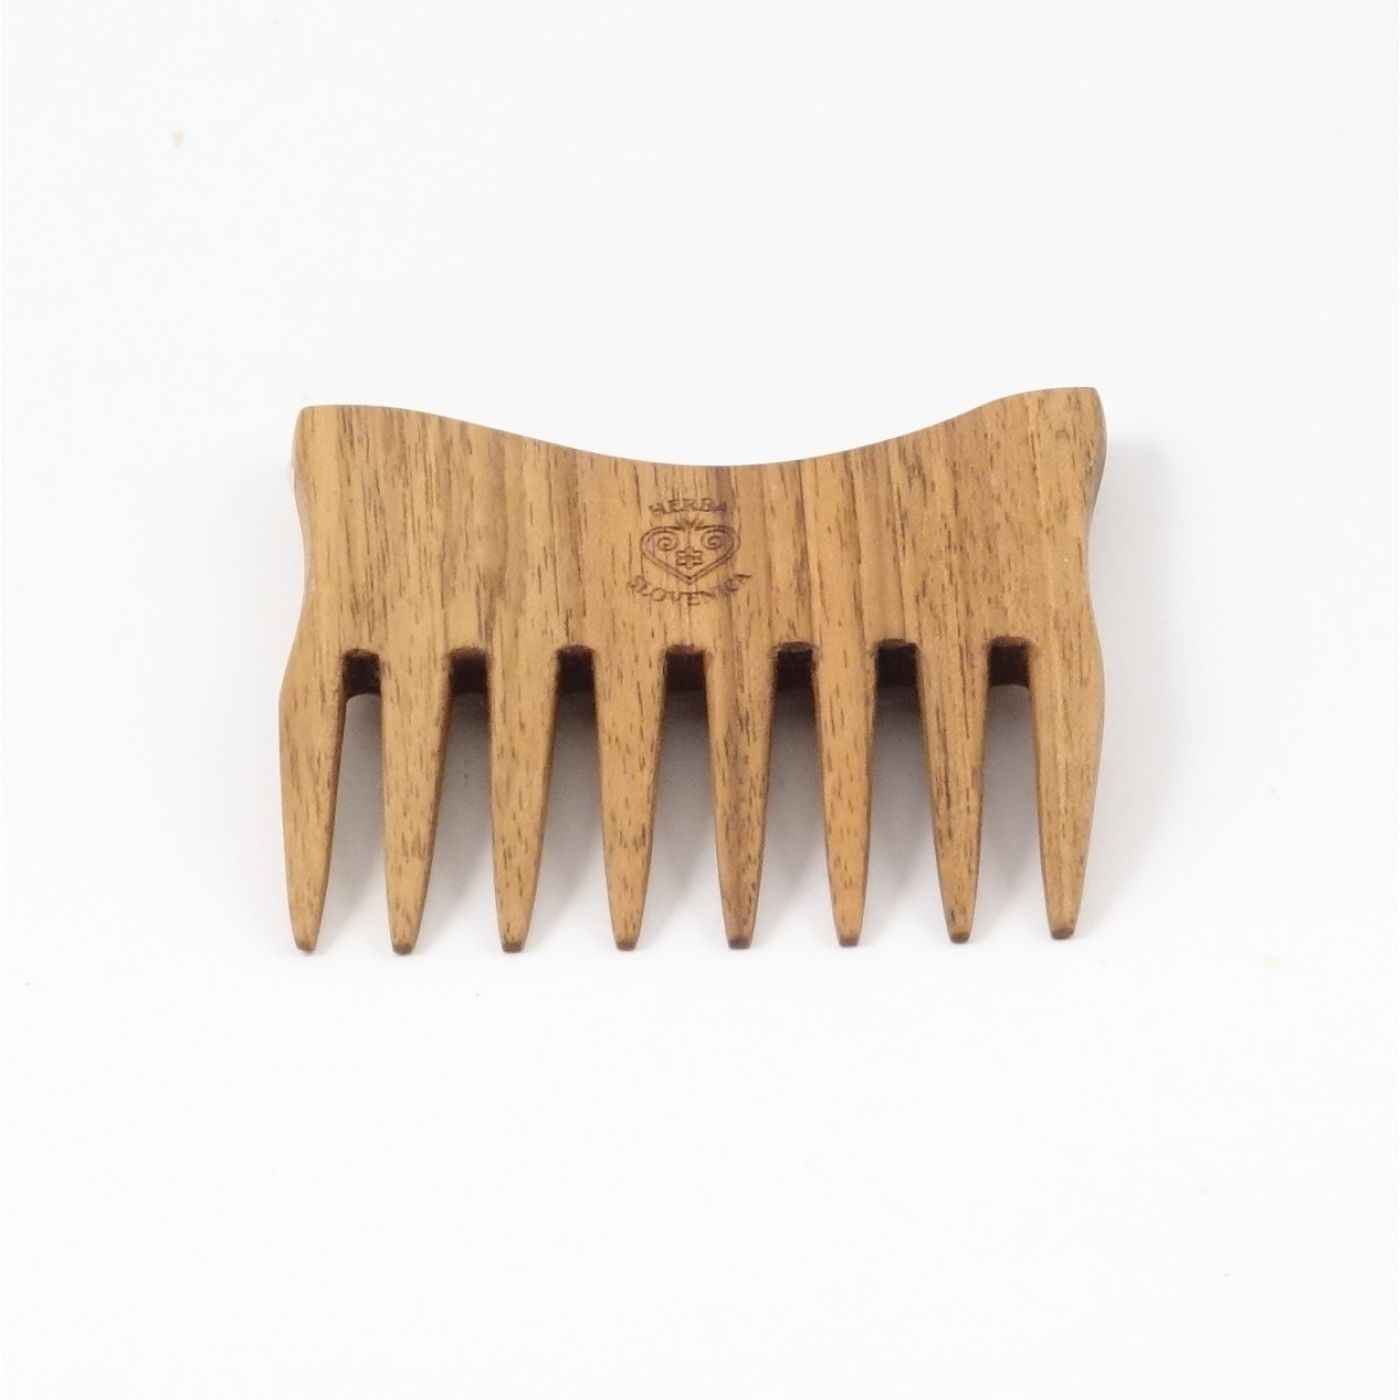 Wooden comb - large without handle